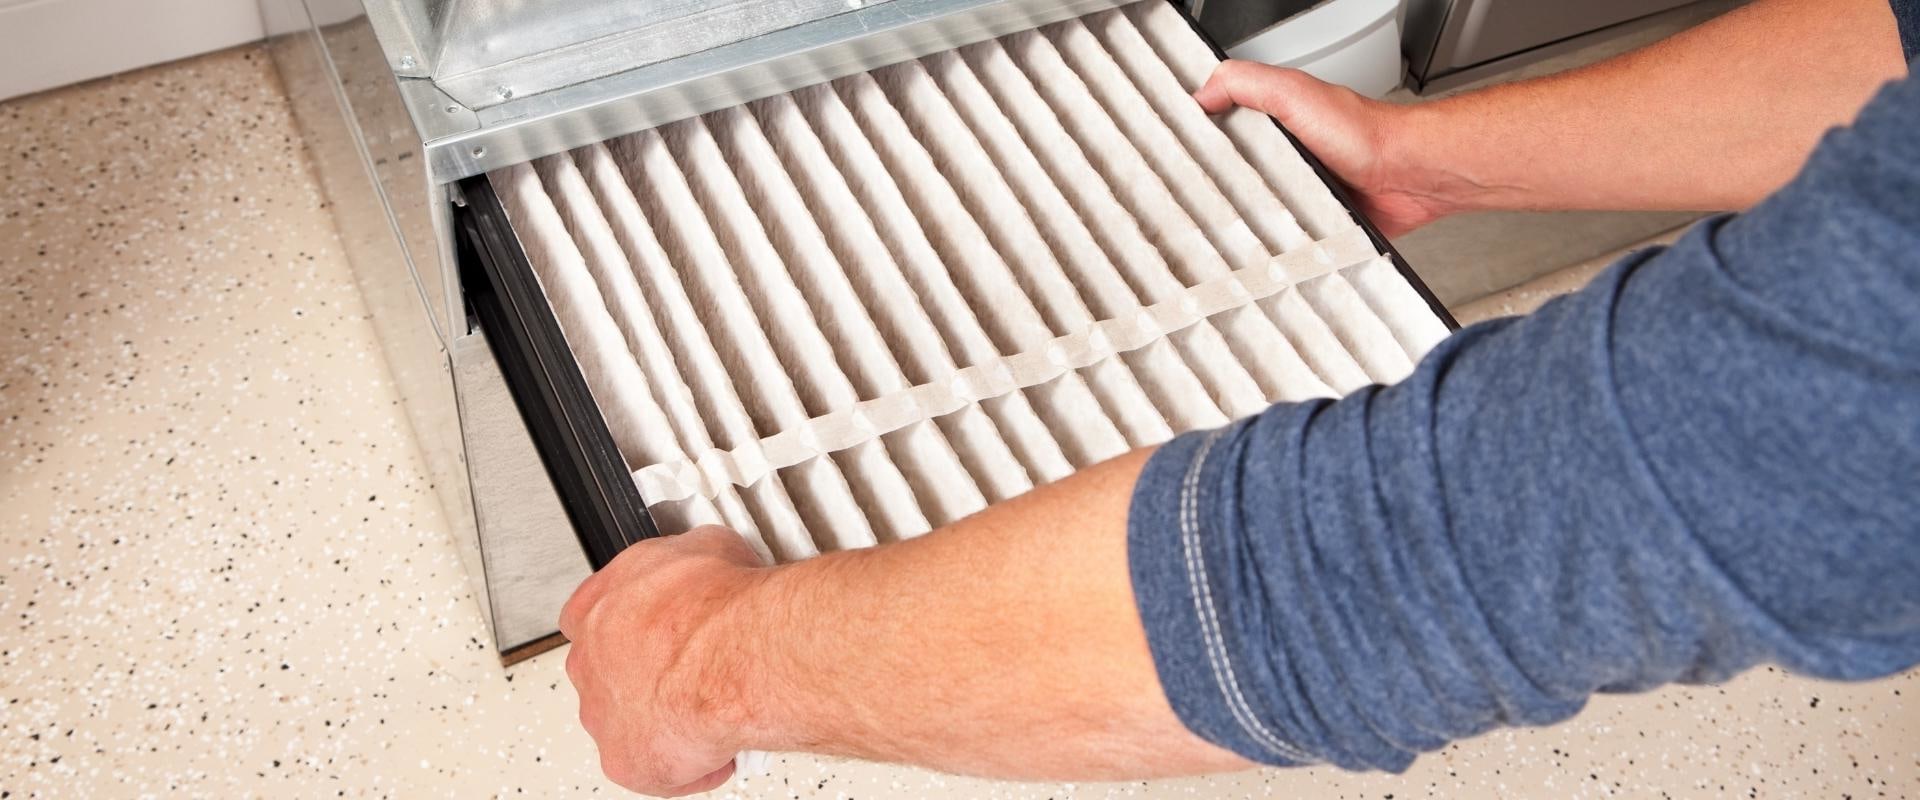 Essential Tools for American Standard HVAC Furnace Home Air Filter Replacements